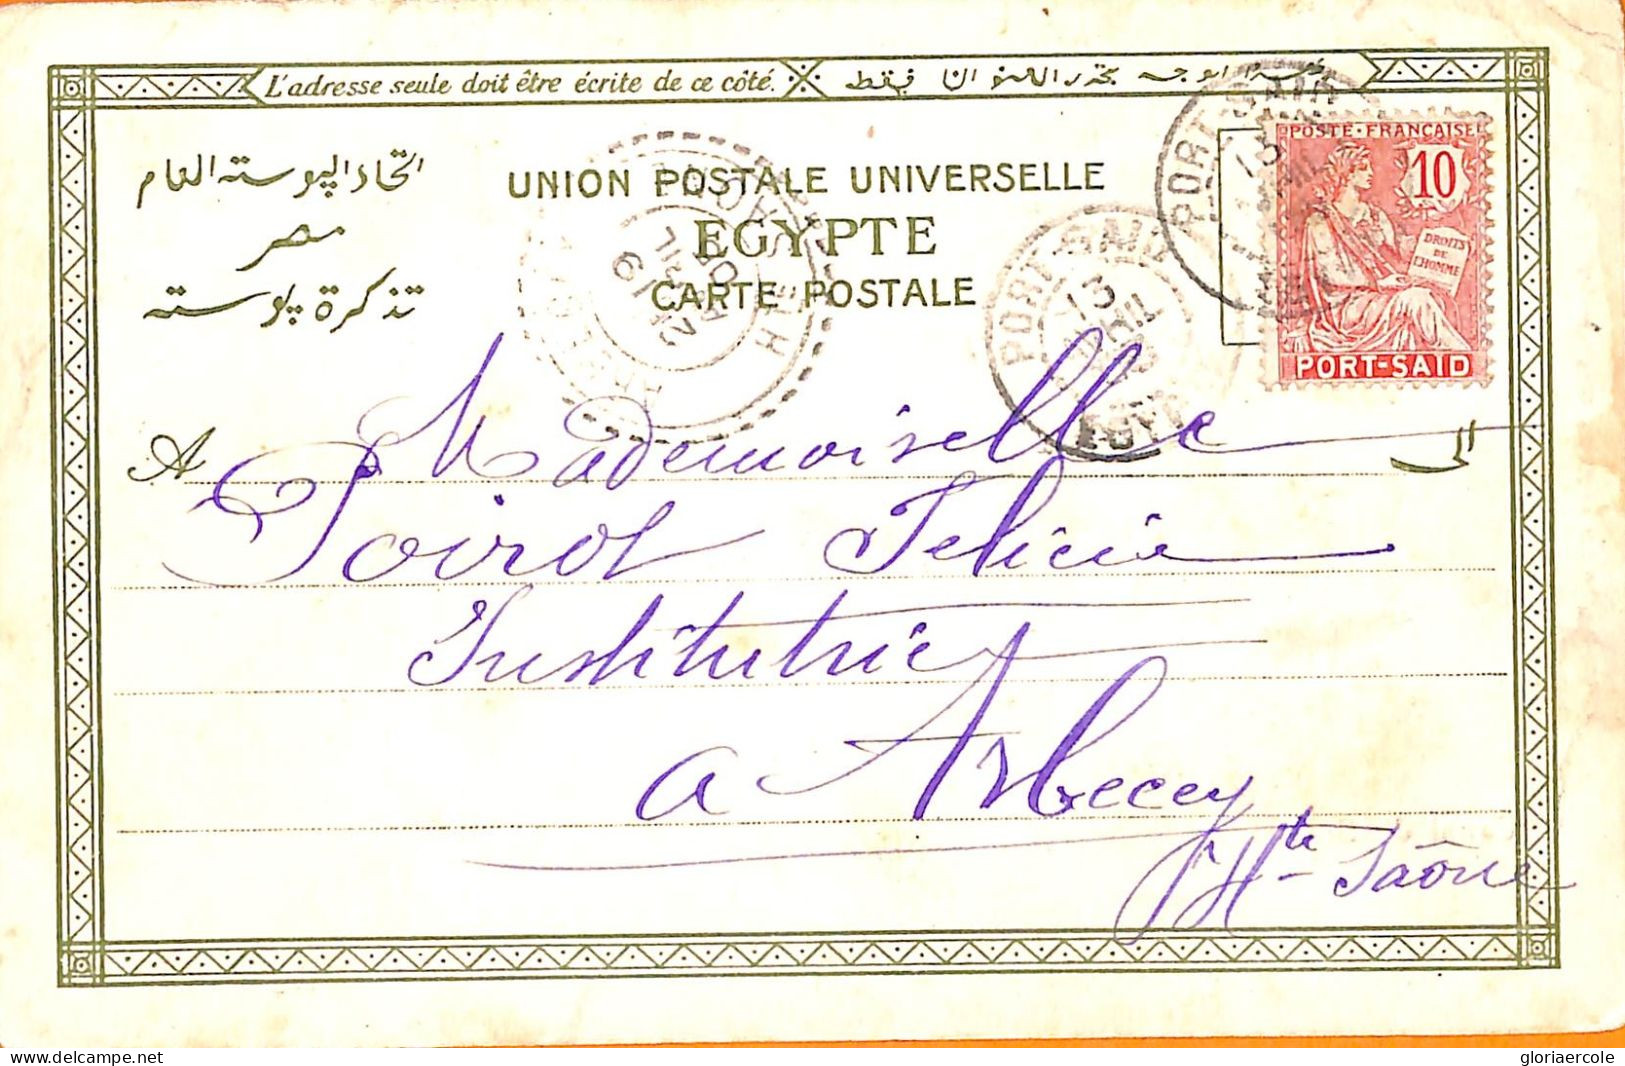 Aa0168 - FRENCH Port Said  EGYPT - POSTAL HISTORY - POSTCARD To FRANCE  1905 - Lettres & Documents